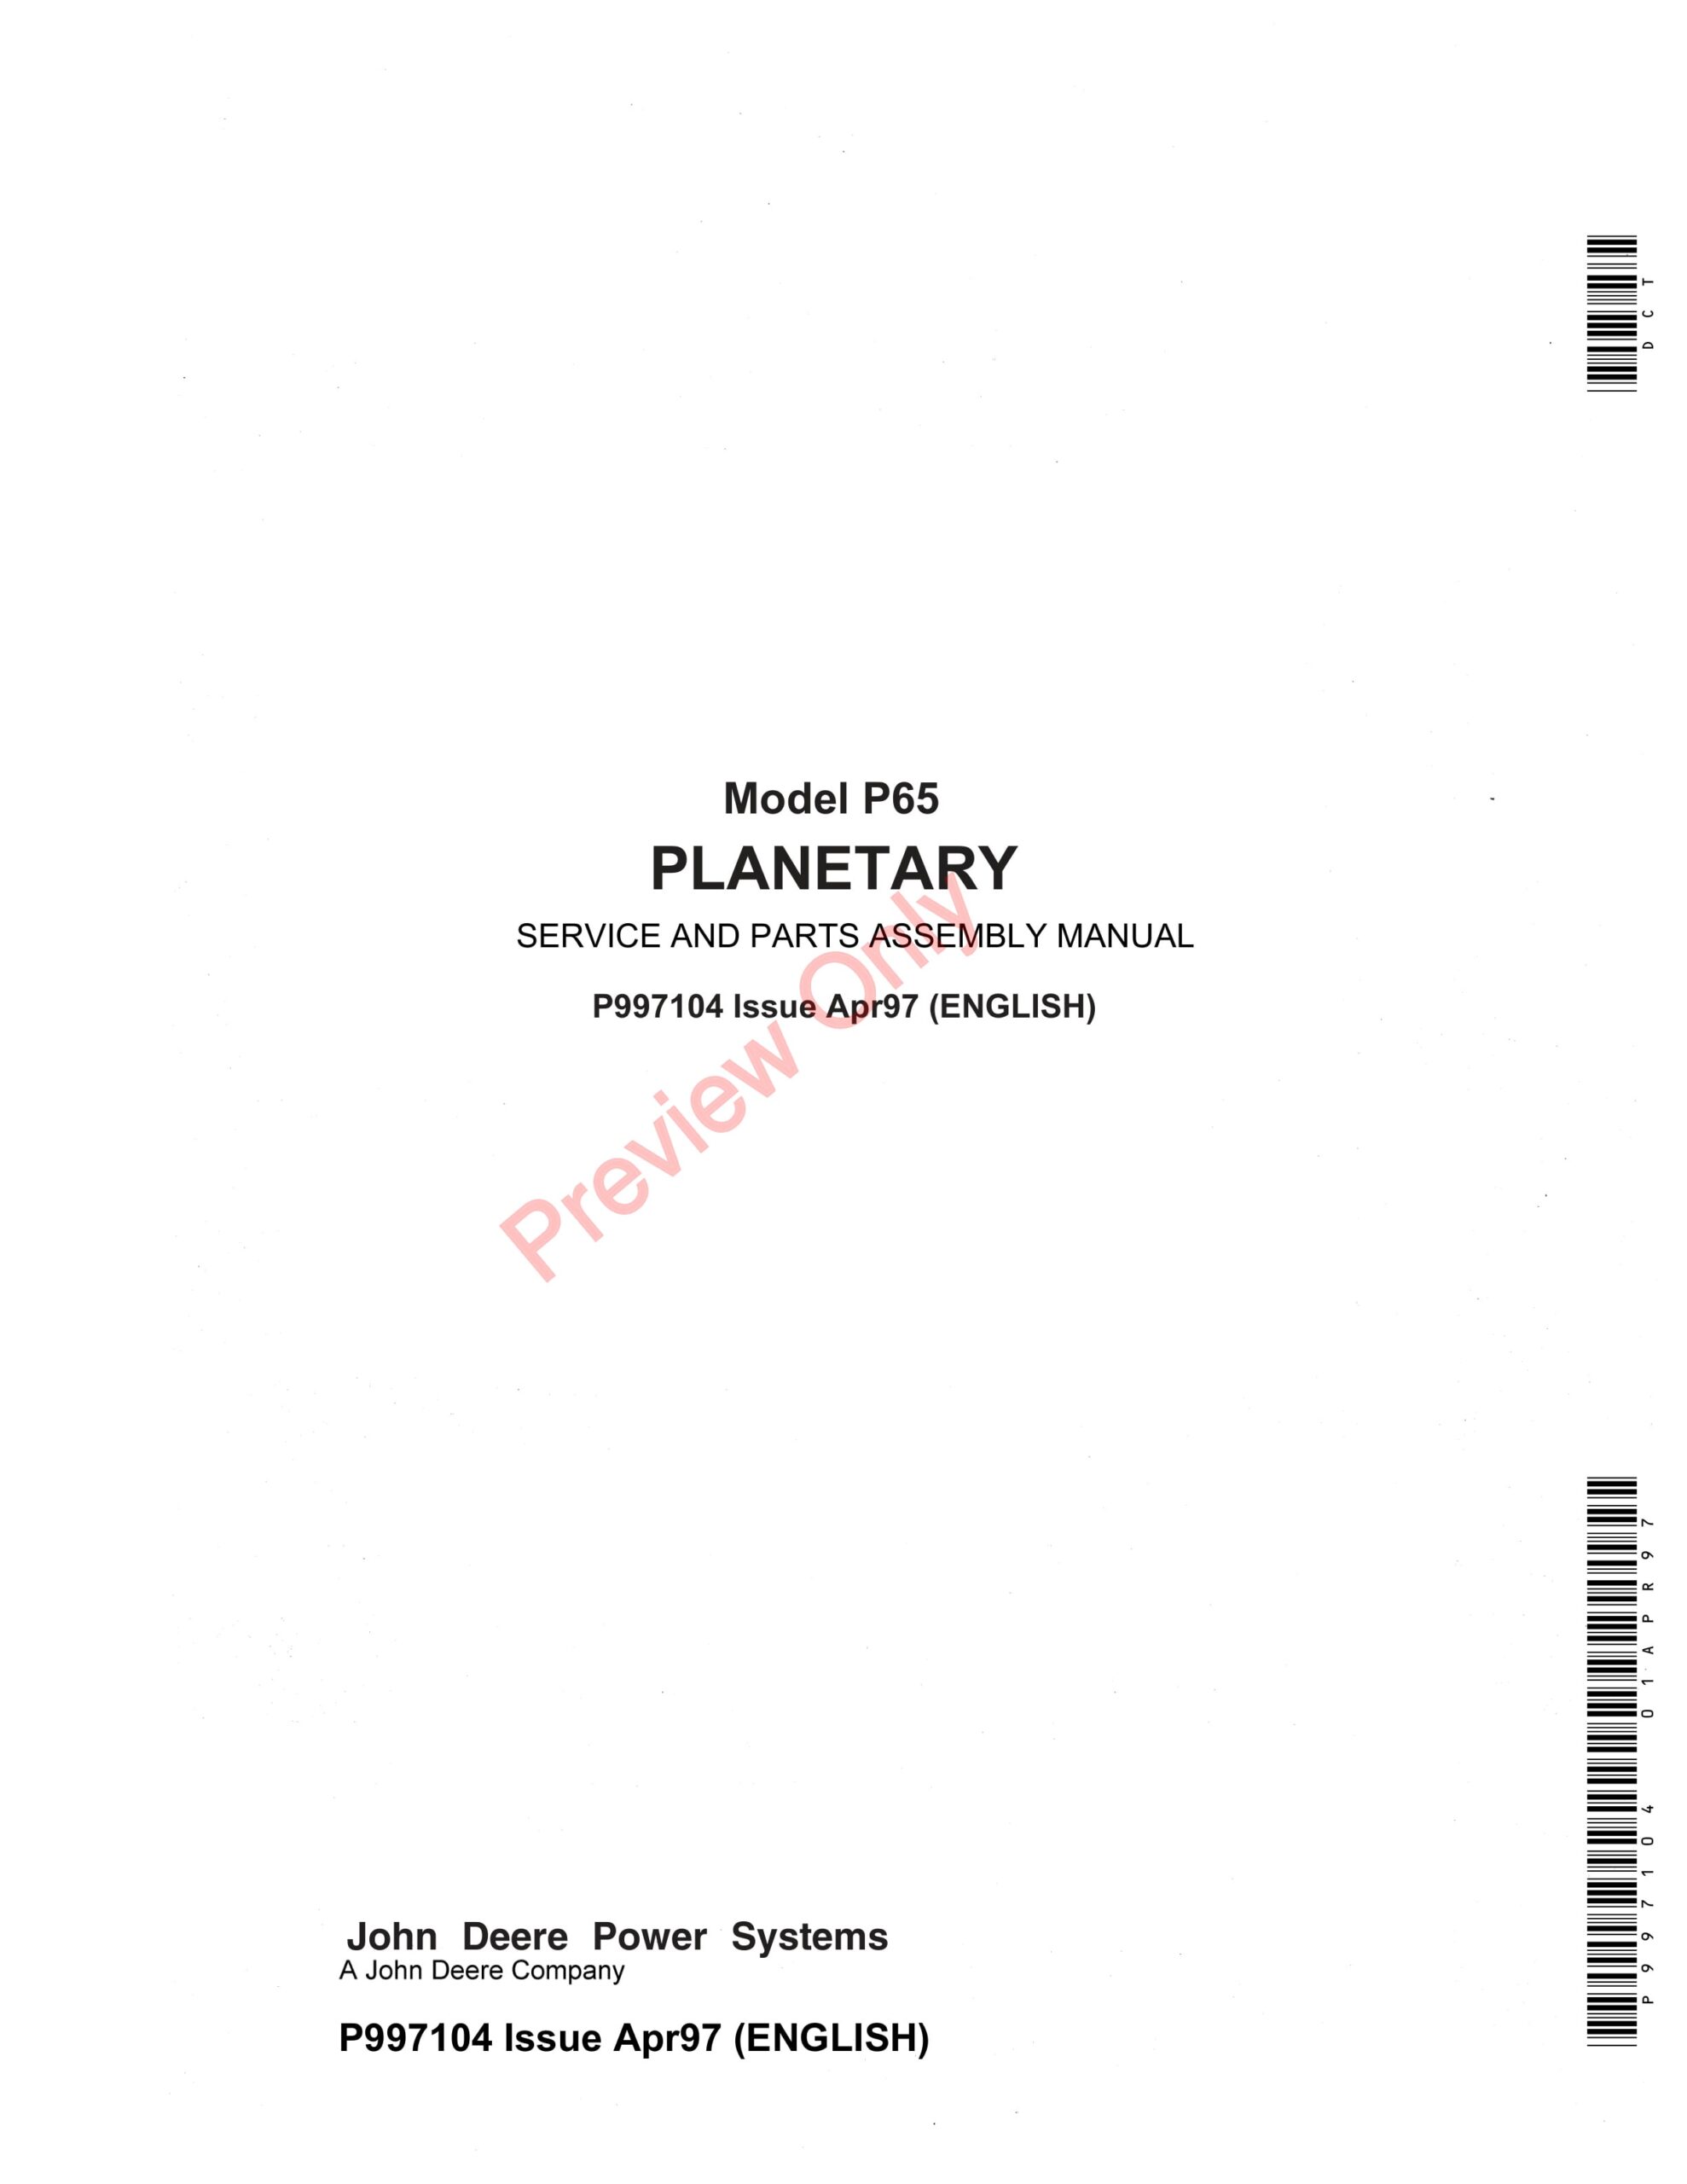 John Deere Model P65 Planetary Service and Parts Assembly Manual P997104 01APR97-1